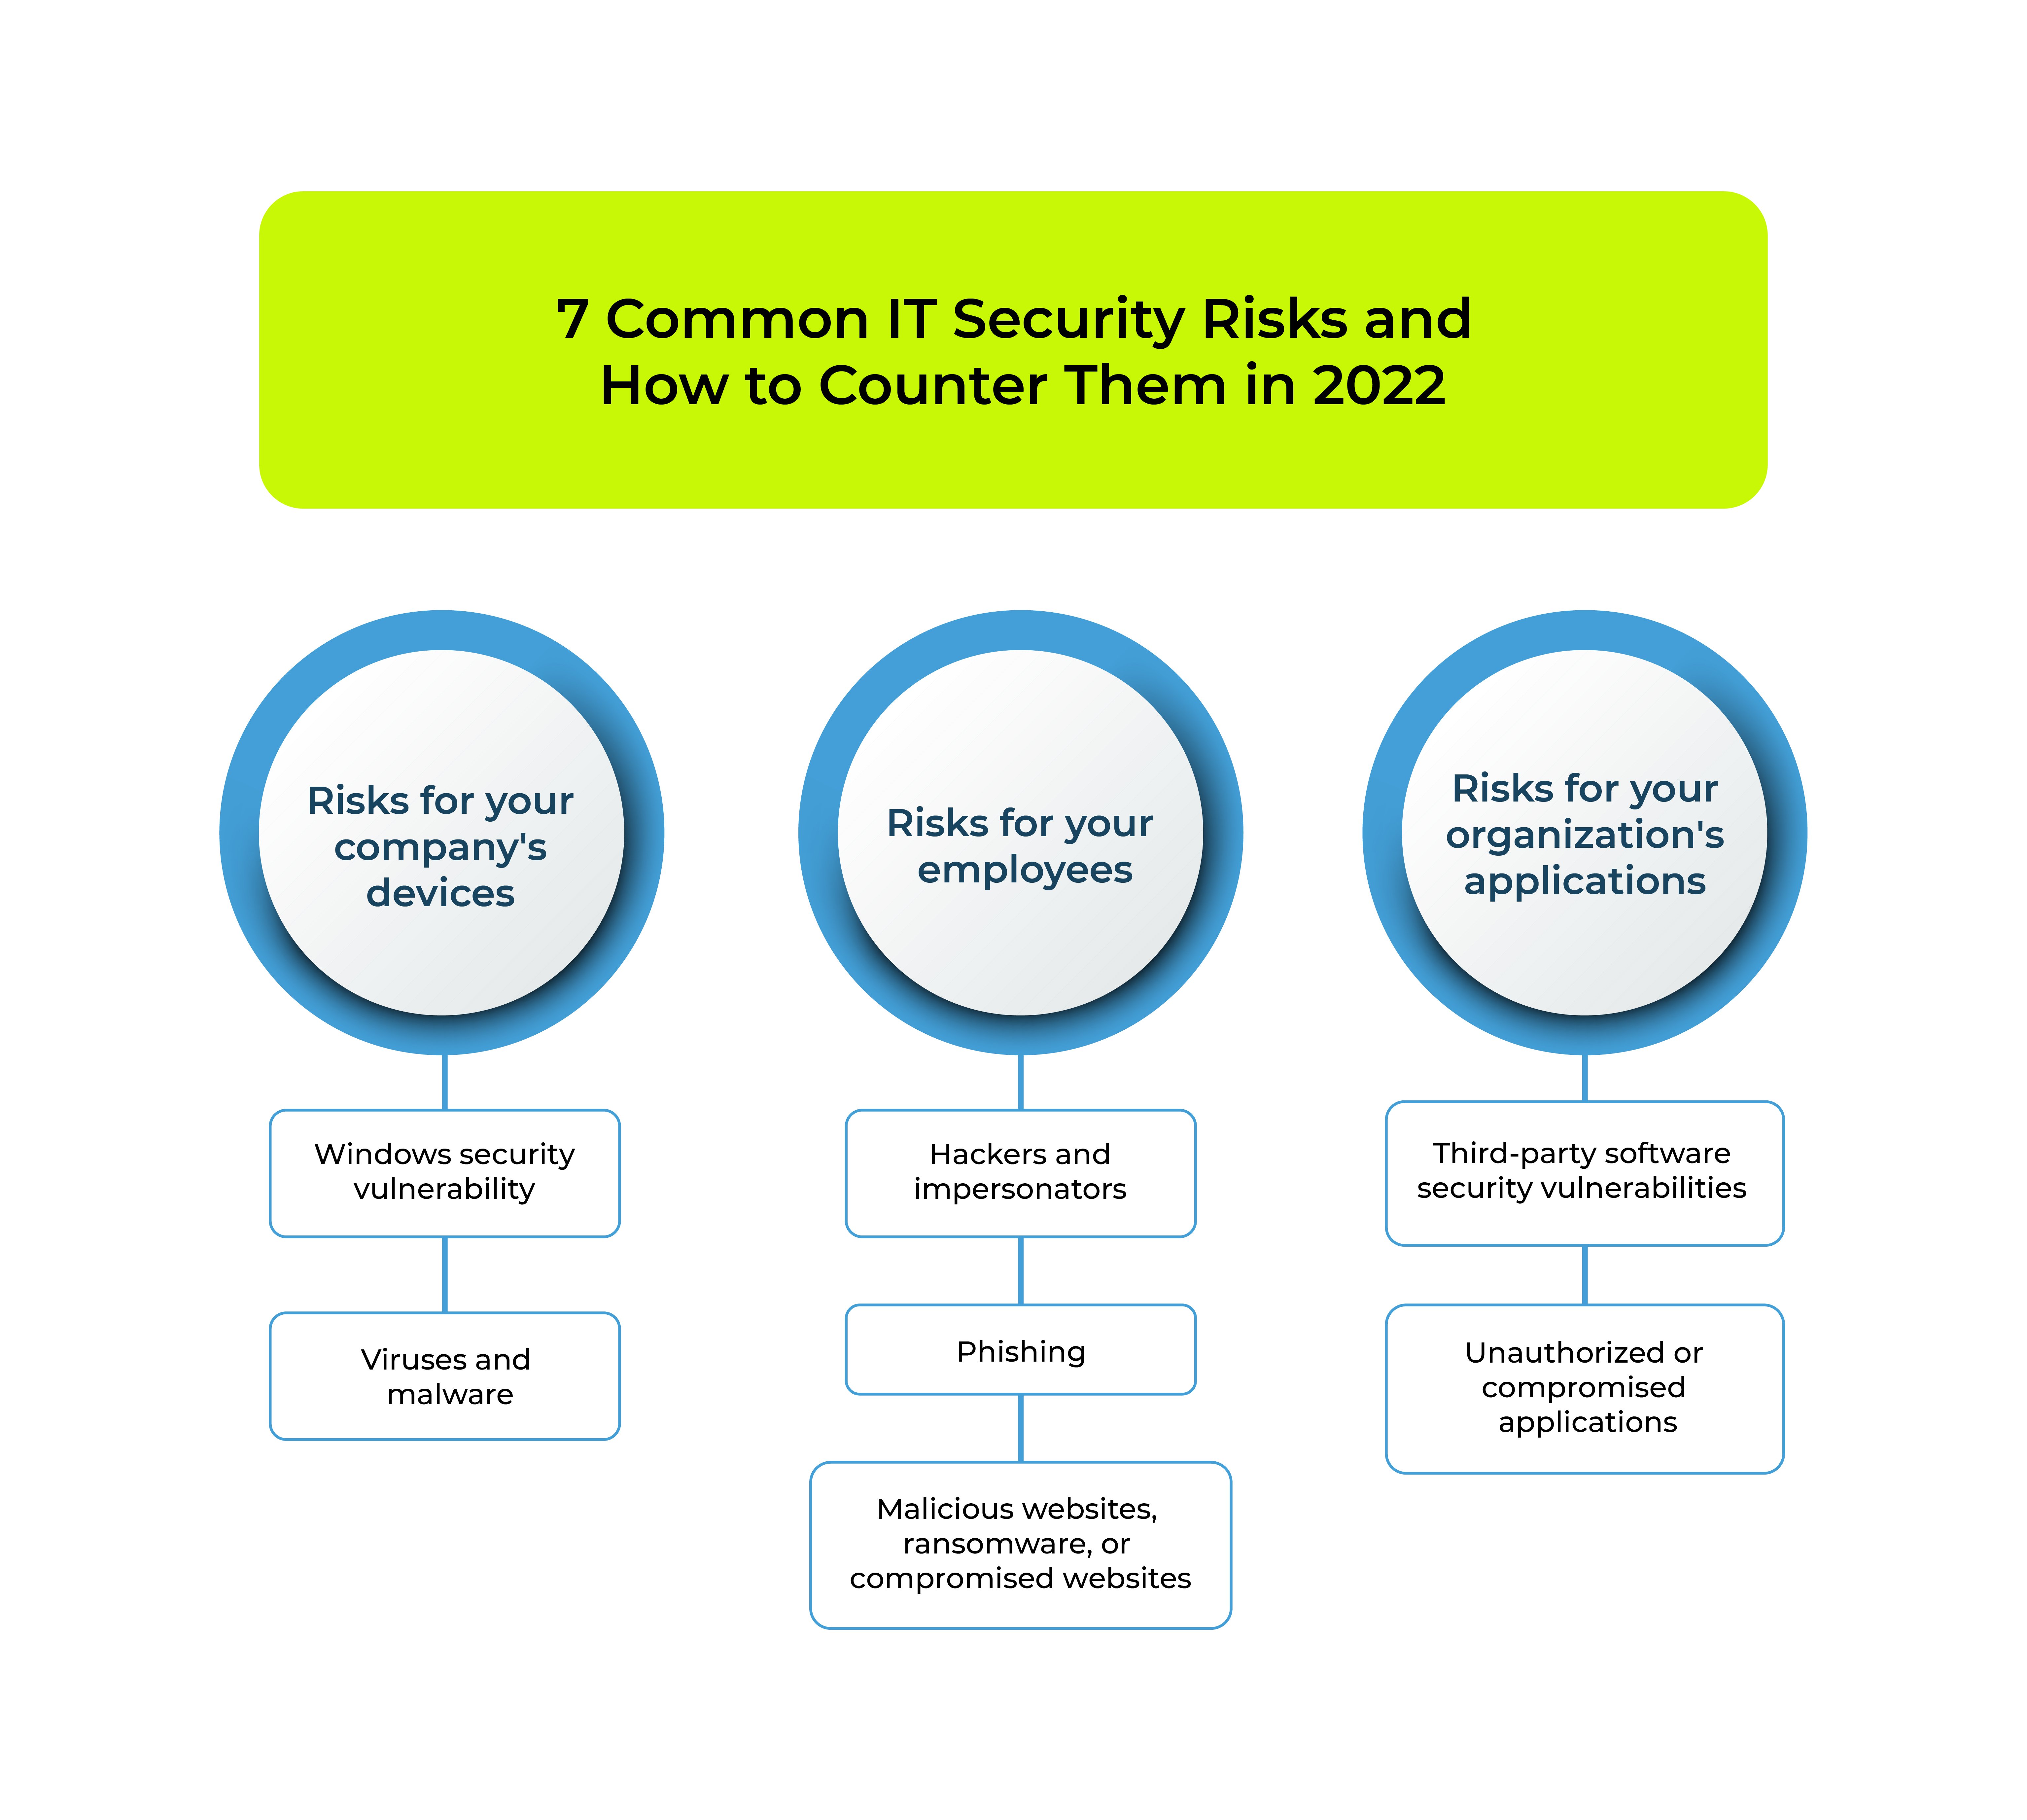 7 Common IT Security Risks and How to Counter Them in 2022